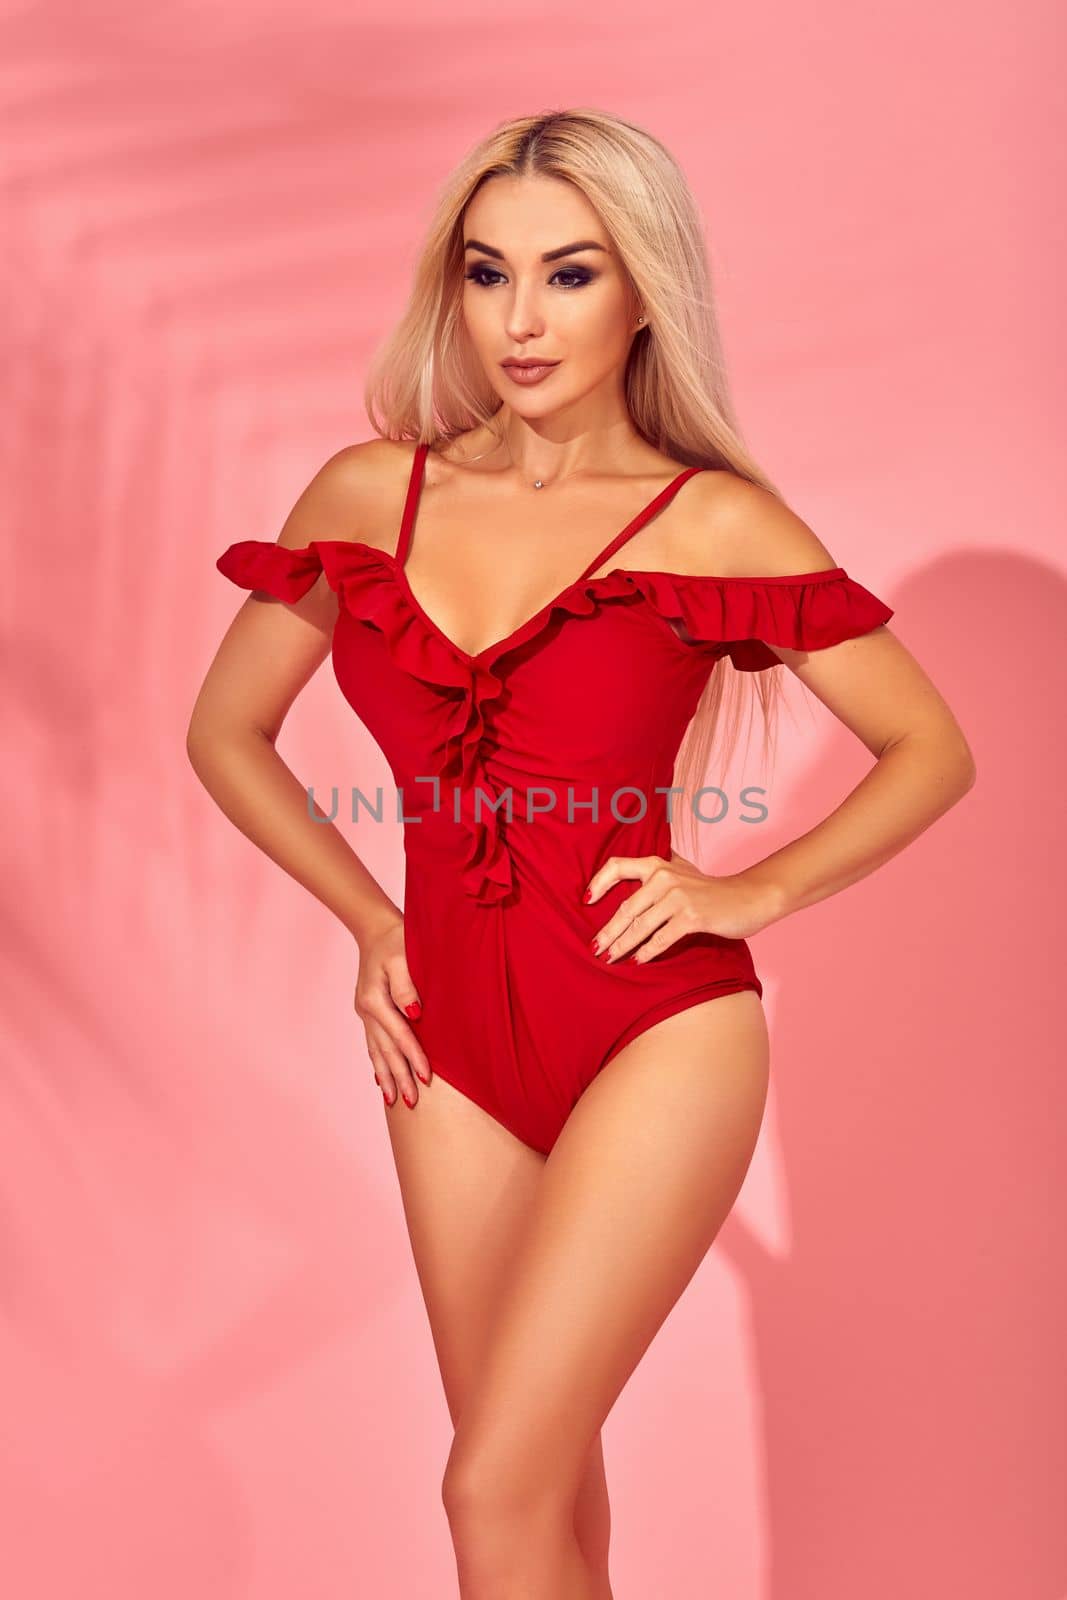 Stunning blonde female model with amazing body standing in an elegant red swimsuit on pink background with palm shadow by nazarovsergey